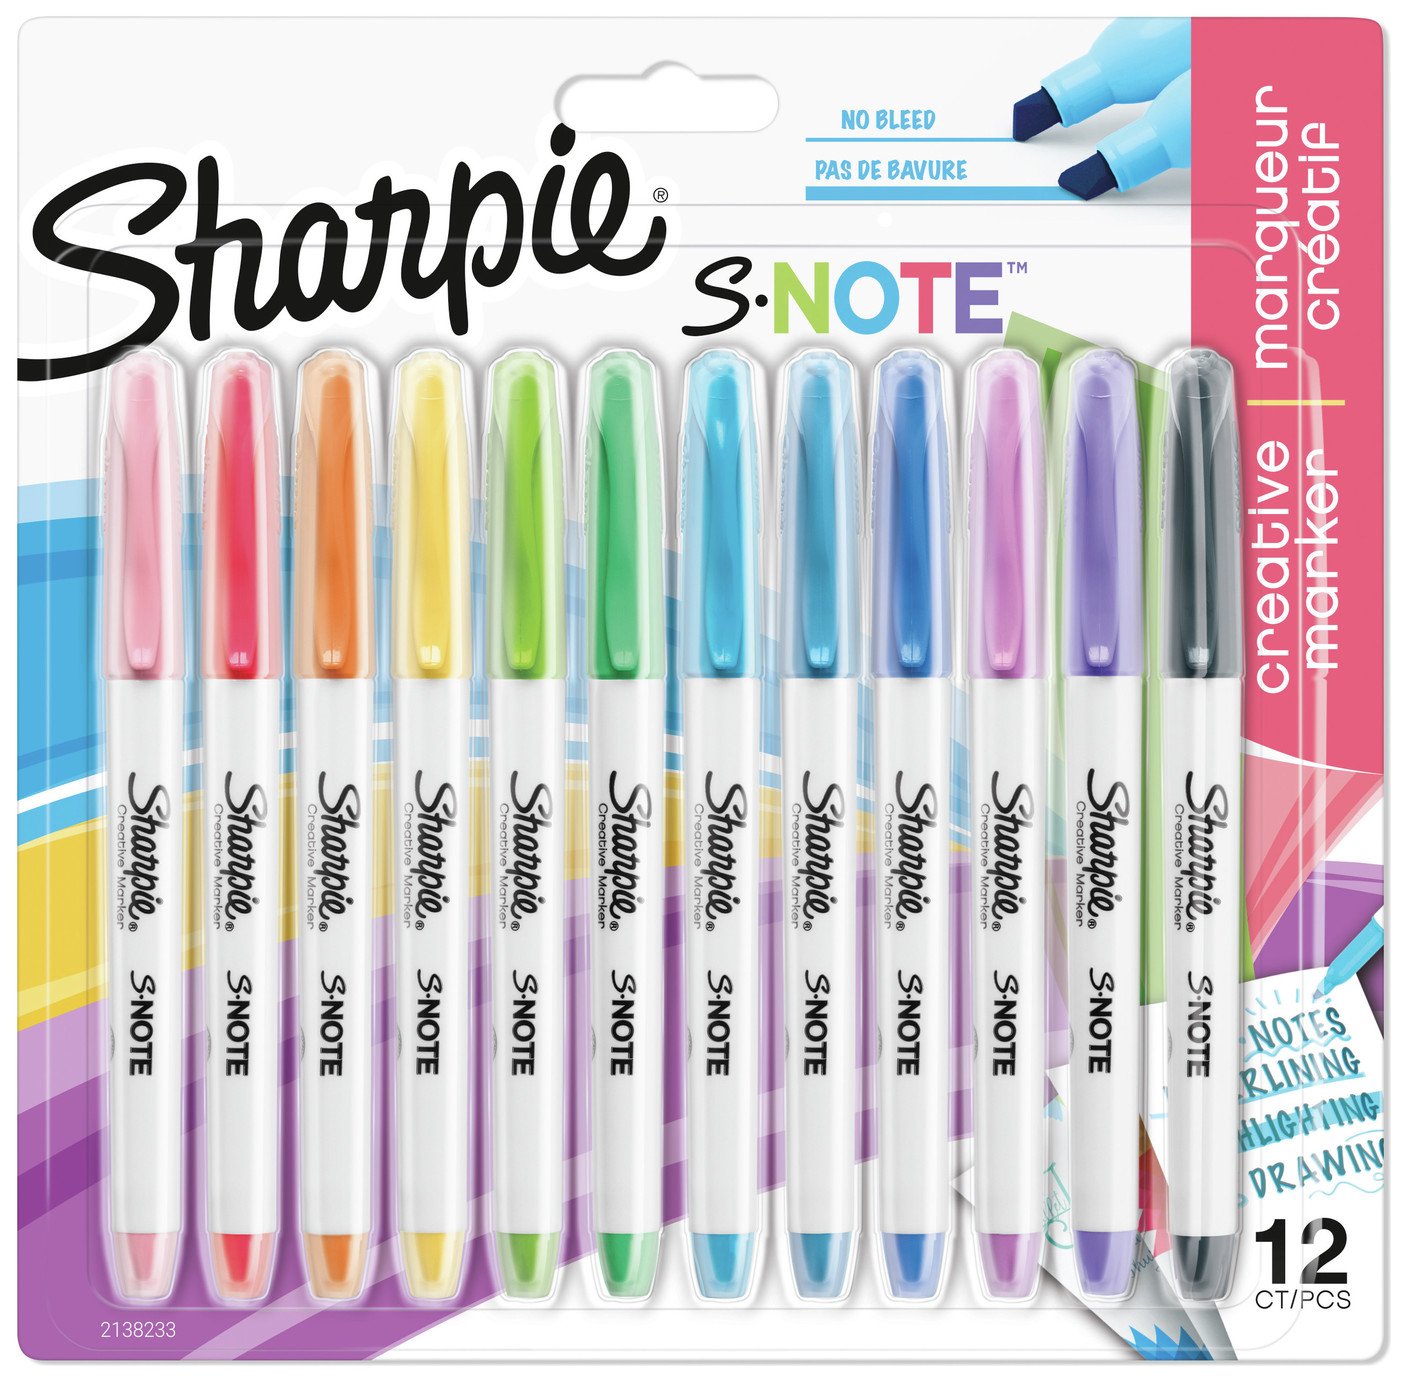 Sharpie S-Note Chisel Tip Highlighter - Pack of 12